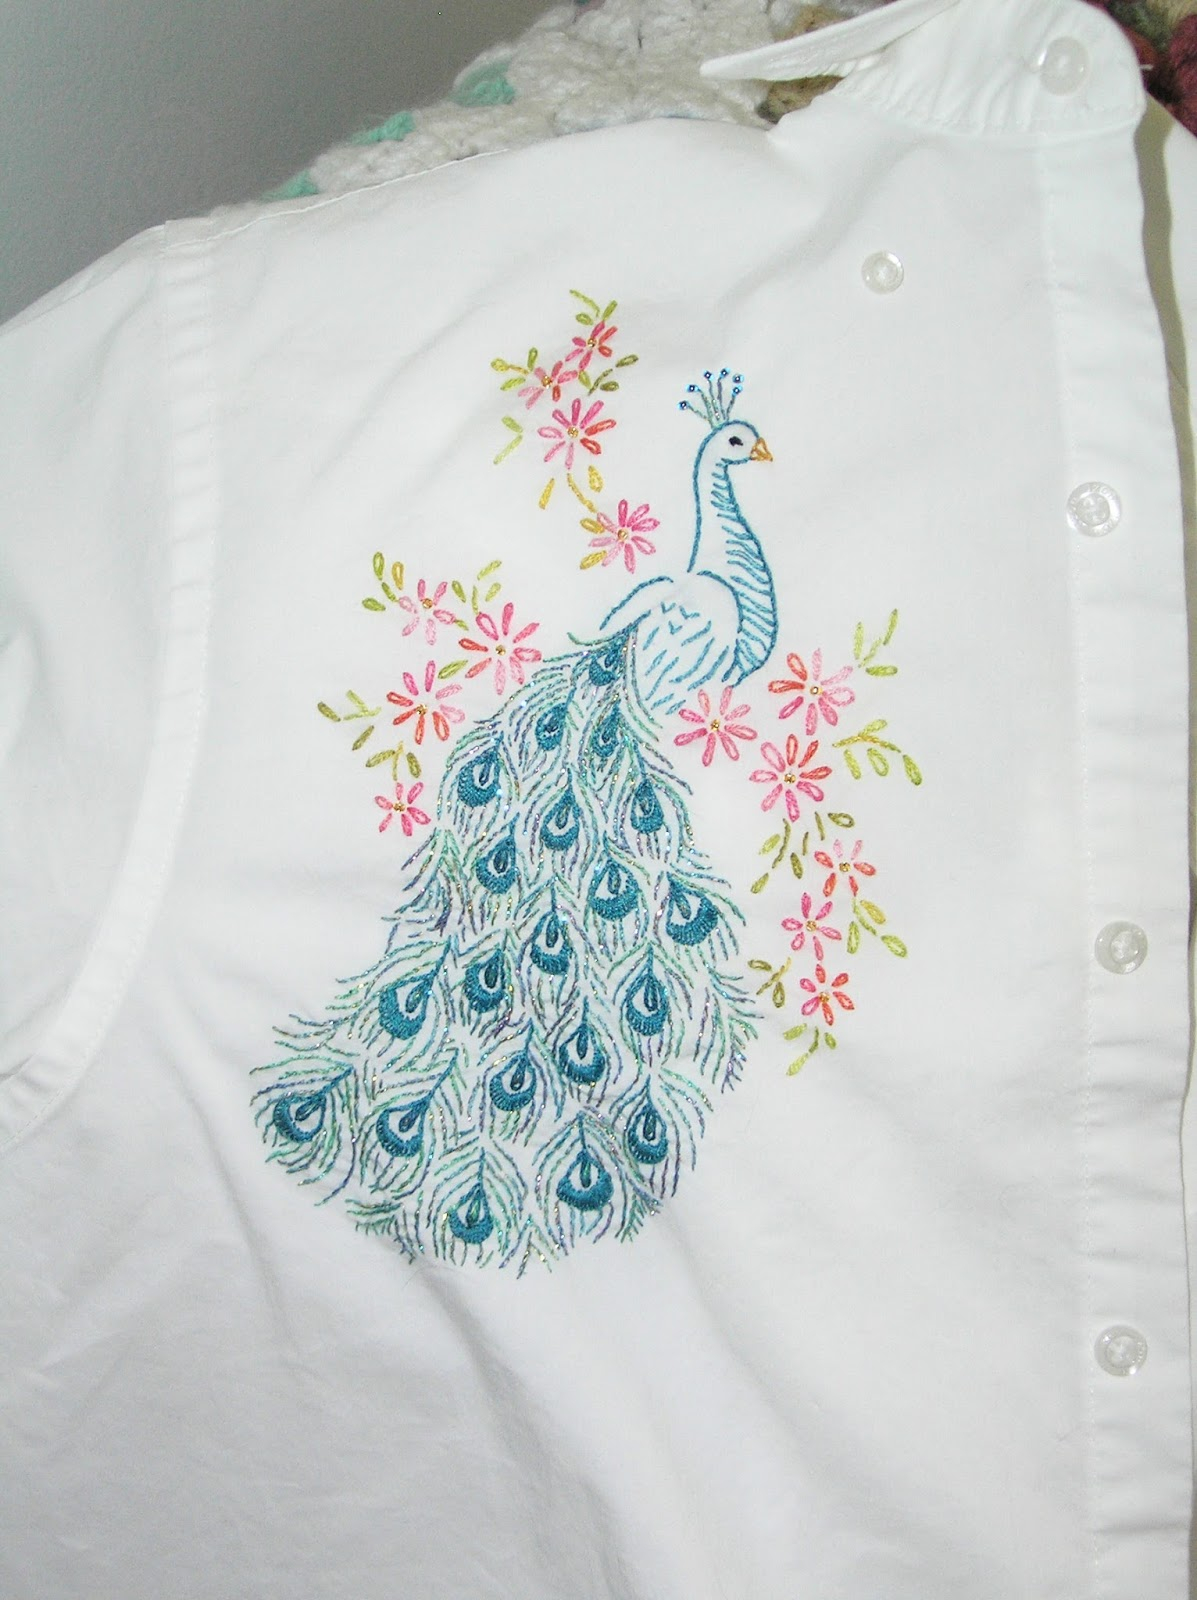 Peacock Embroidery Pattern Kitty And Me Designs Peacock Embroidery Pattern